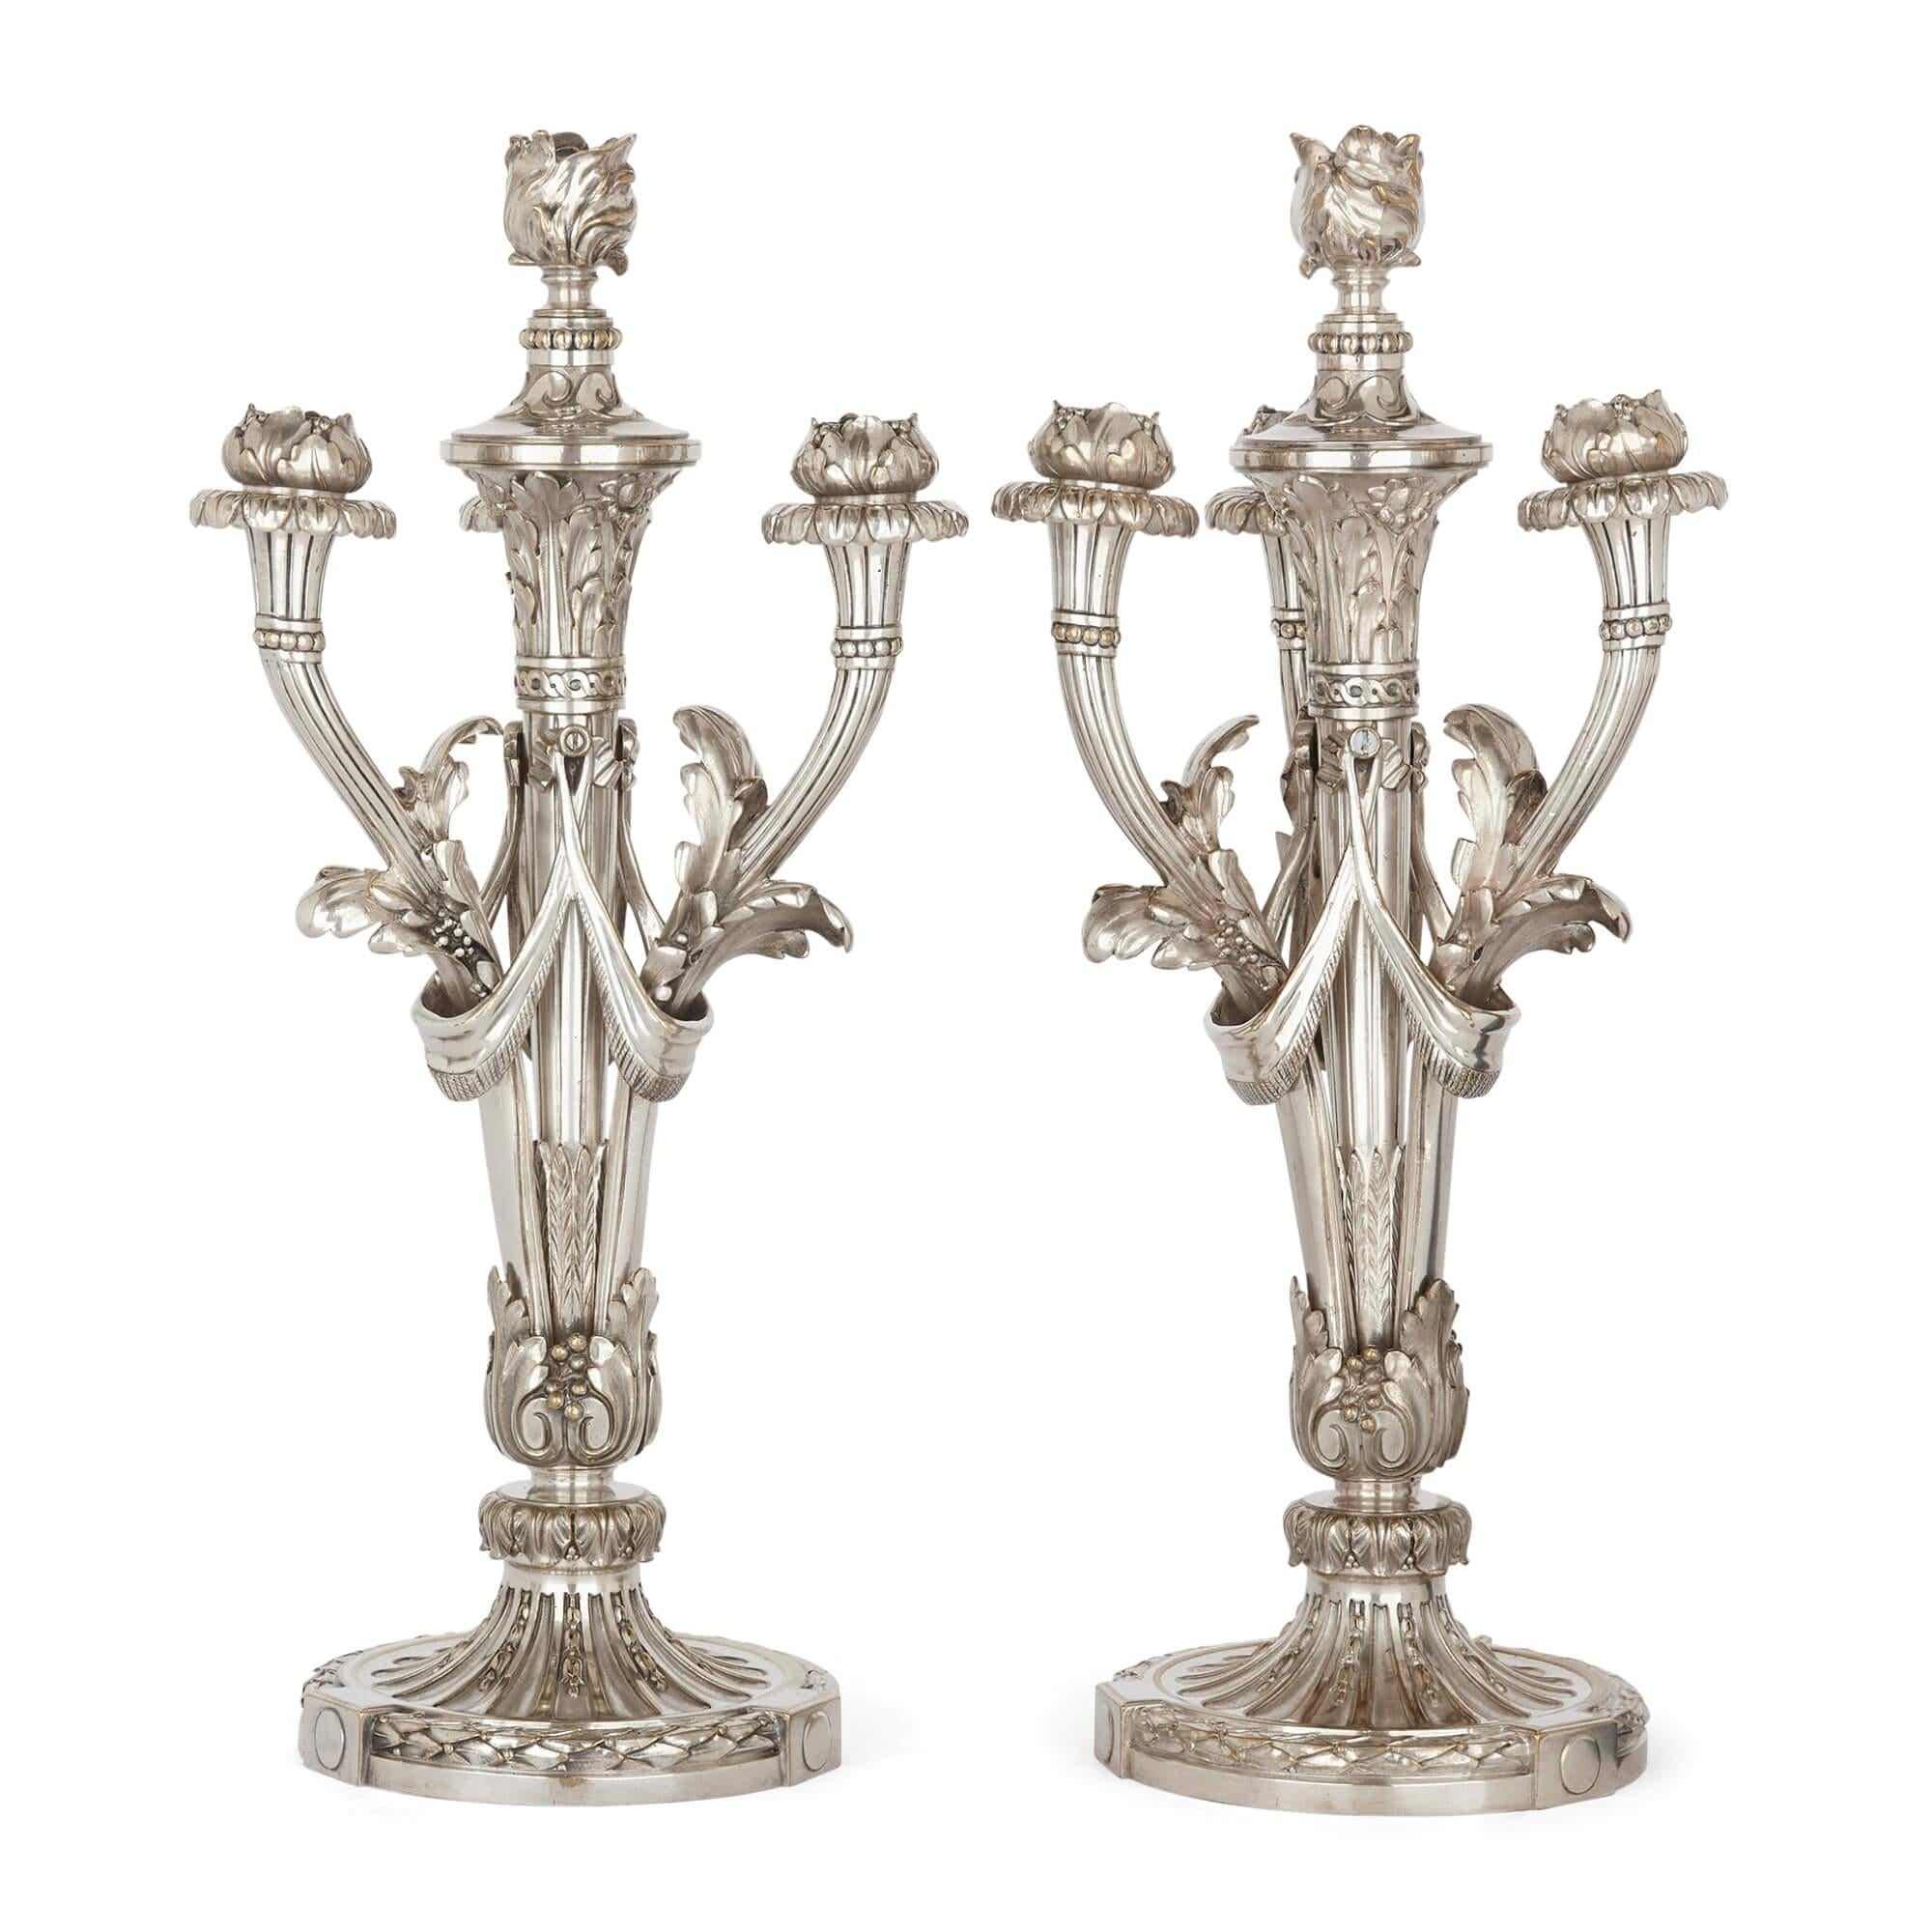 Pair of French Christofle table candelabra in silvered bronze
French, late 19th century
Measures: Height 49cm, width 22cm, depth 22cm

These fine Christofle silvered bronze candelabra are designed in a classical style that in many ways hints at